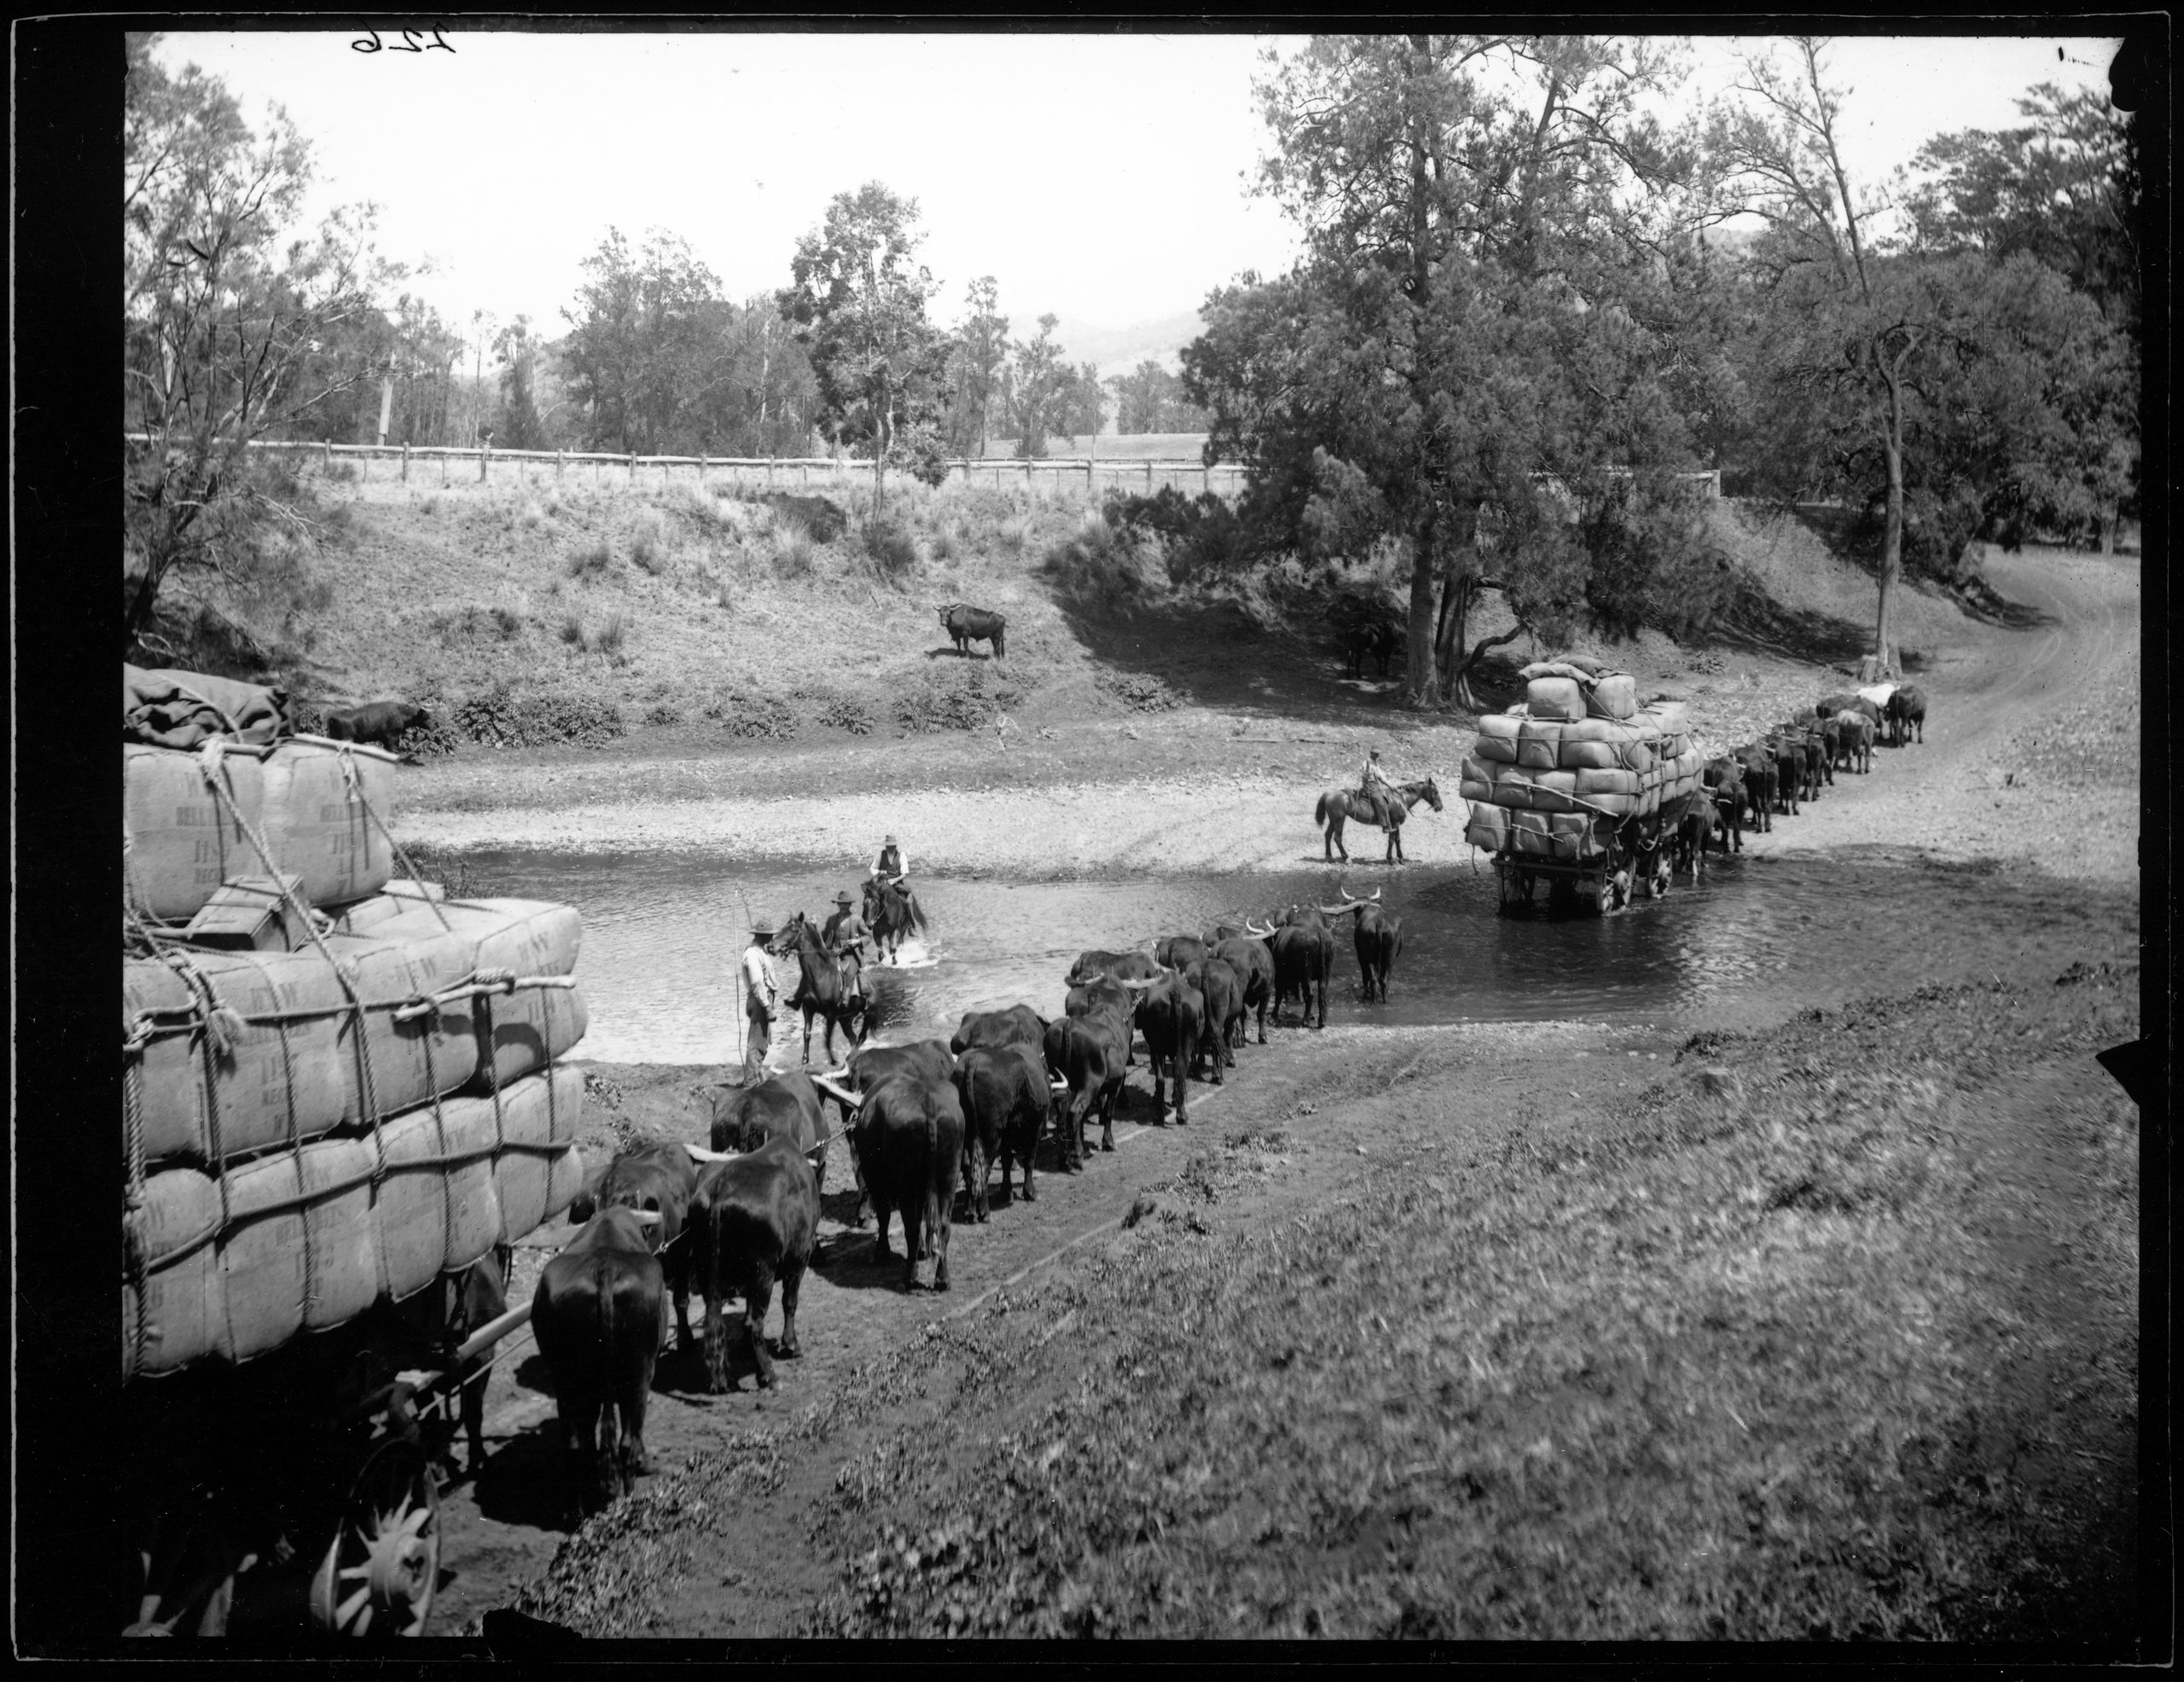 'Bullock Team Pulling Wool Bales' glass plate negative from the Tyrrell collection